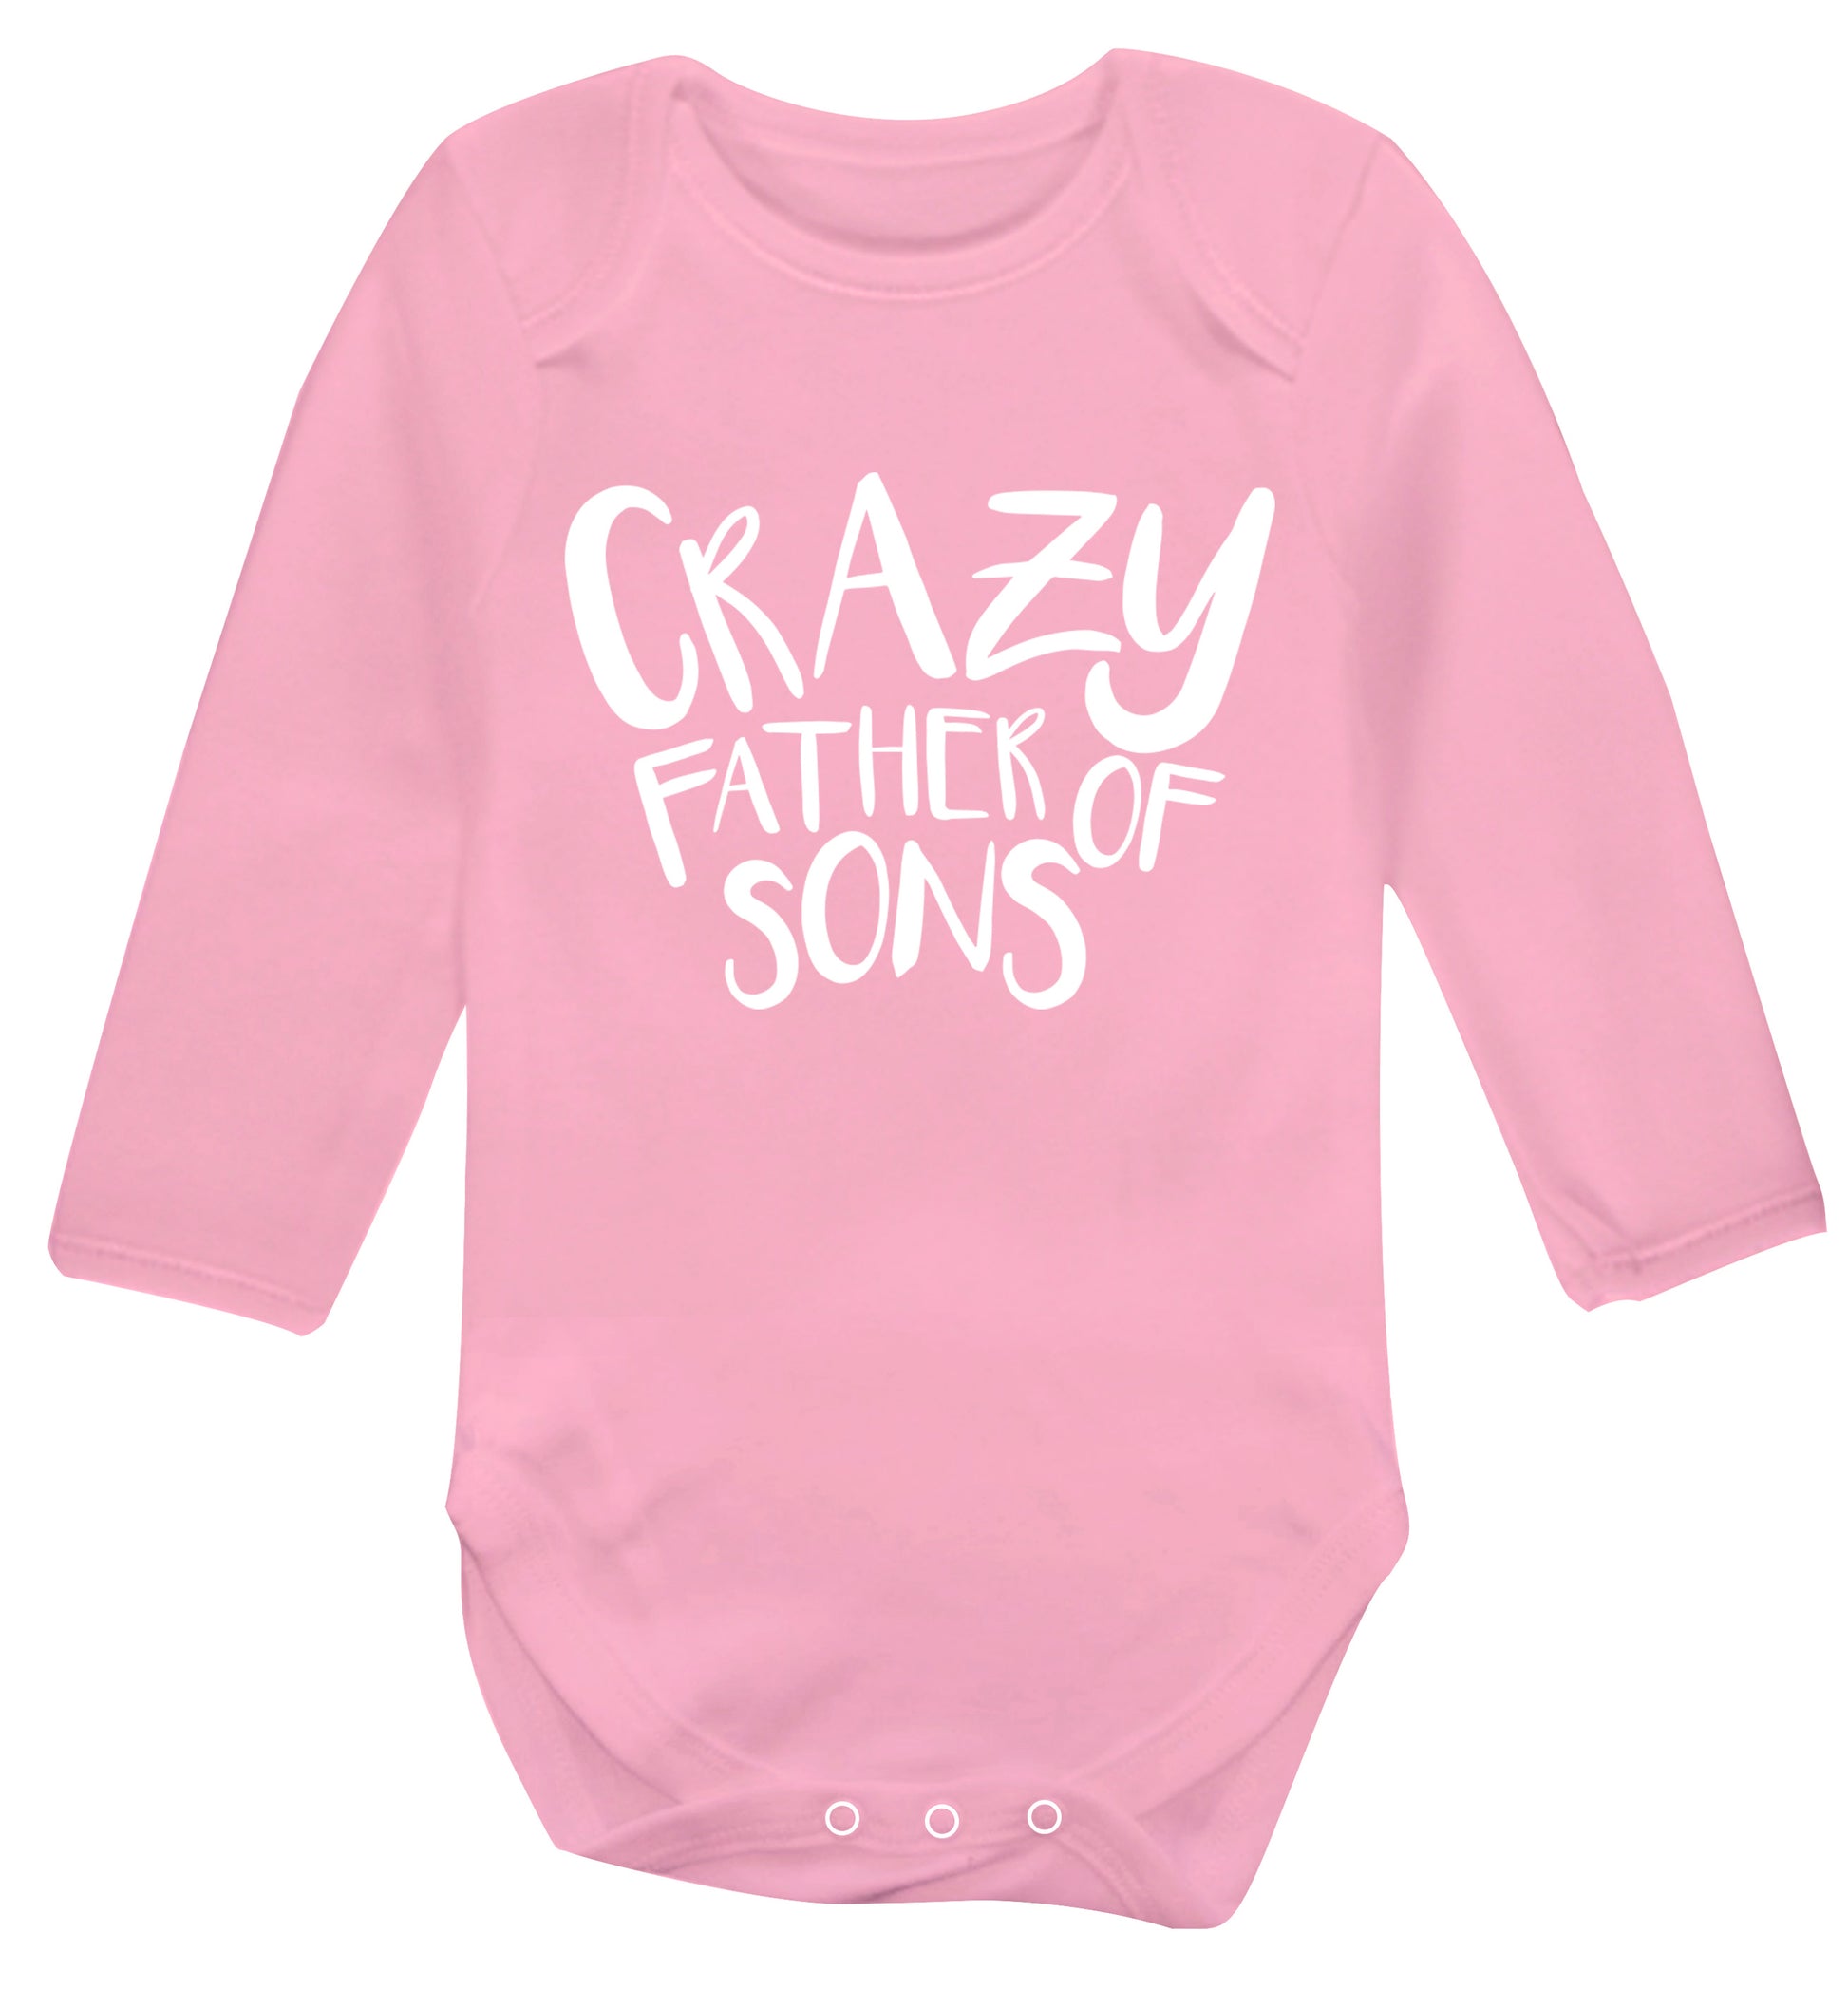 Crazy father of sons Baby Vest long sleeved pale pink 6-12 months